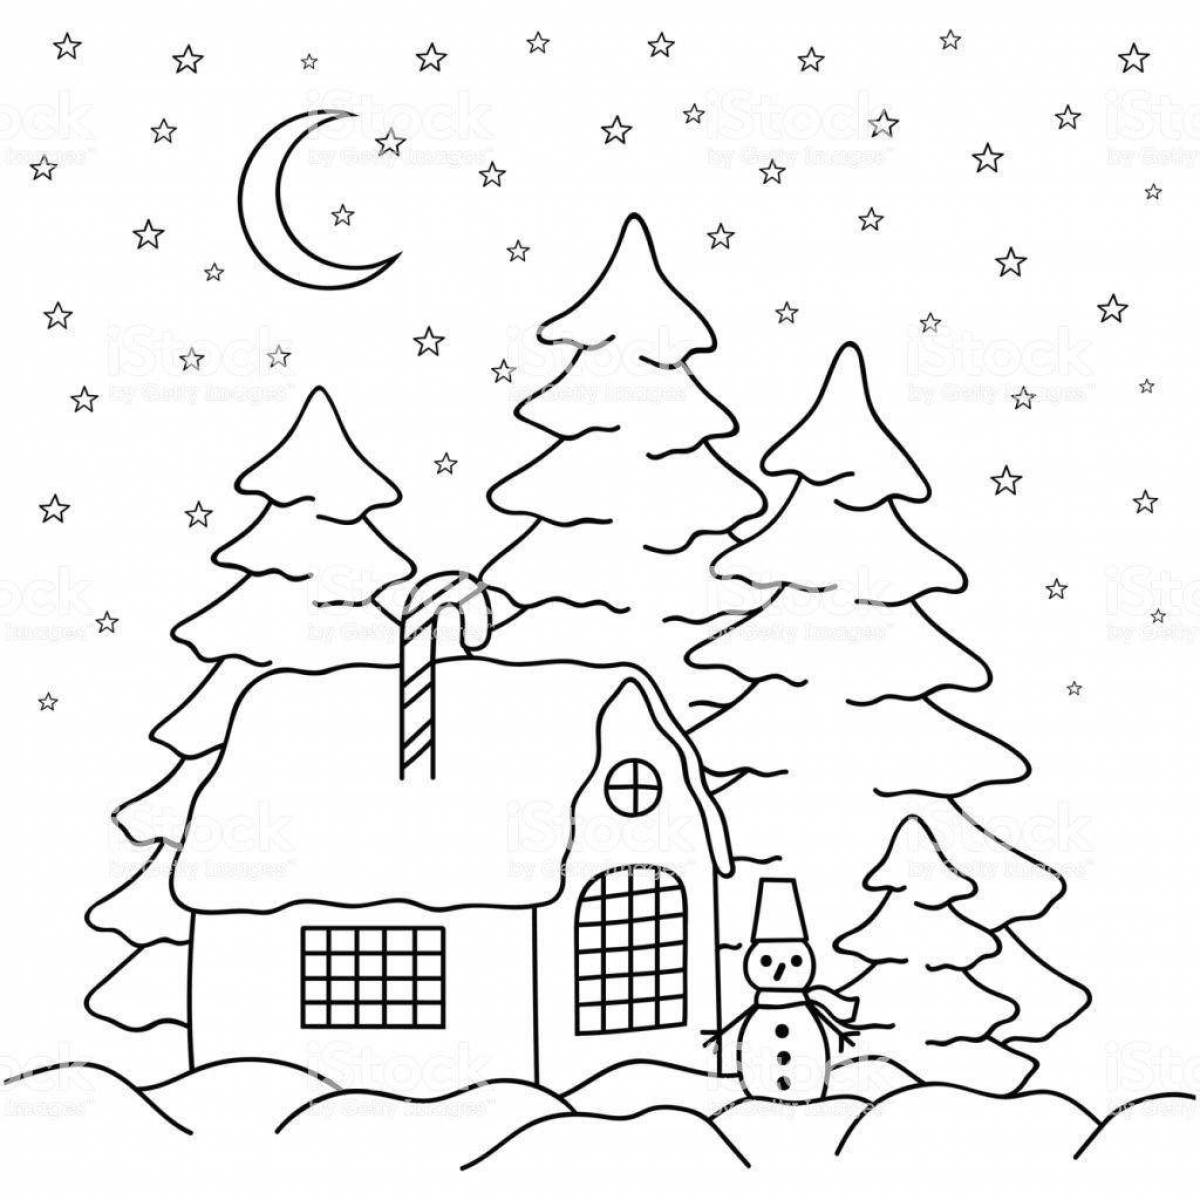 Majestic snow house coloring page